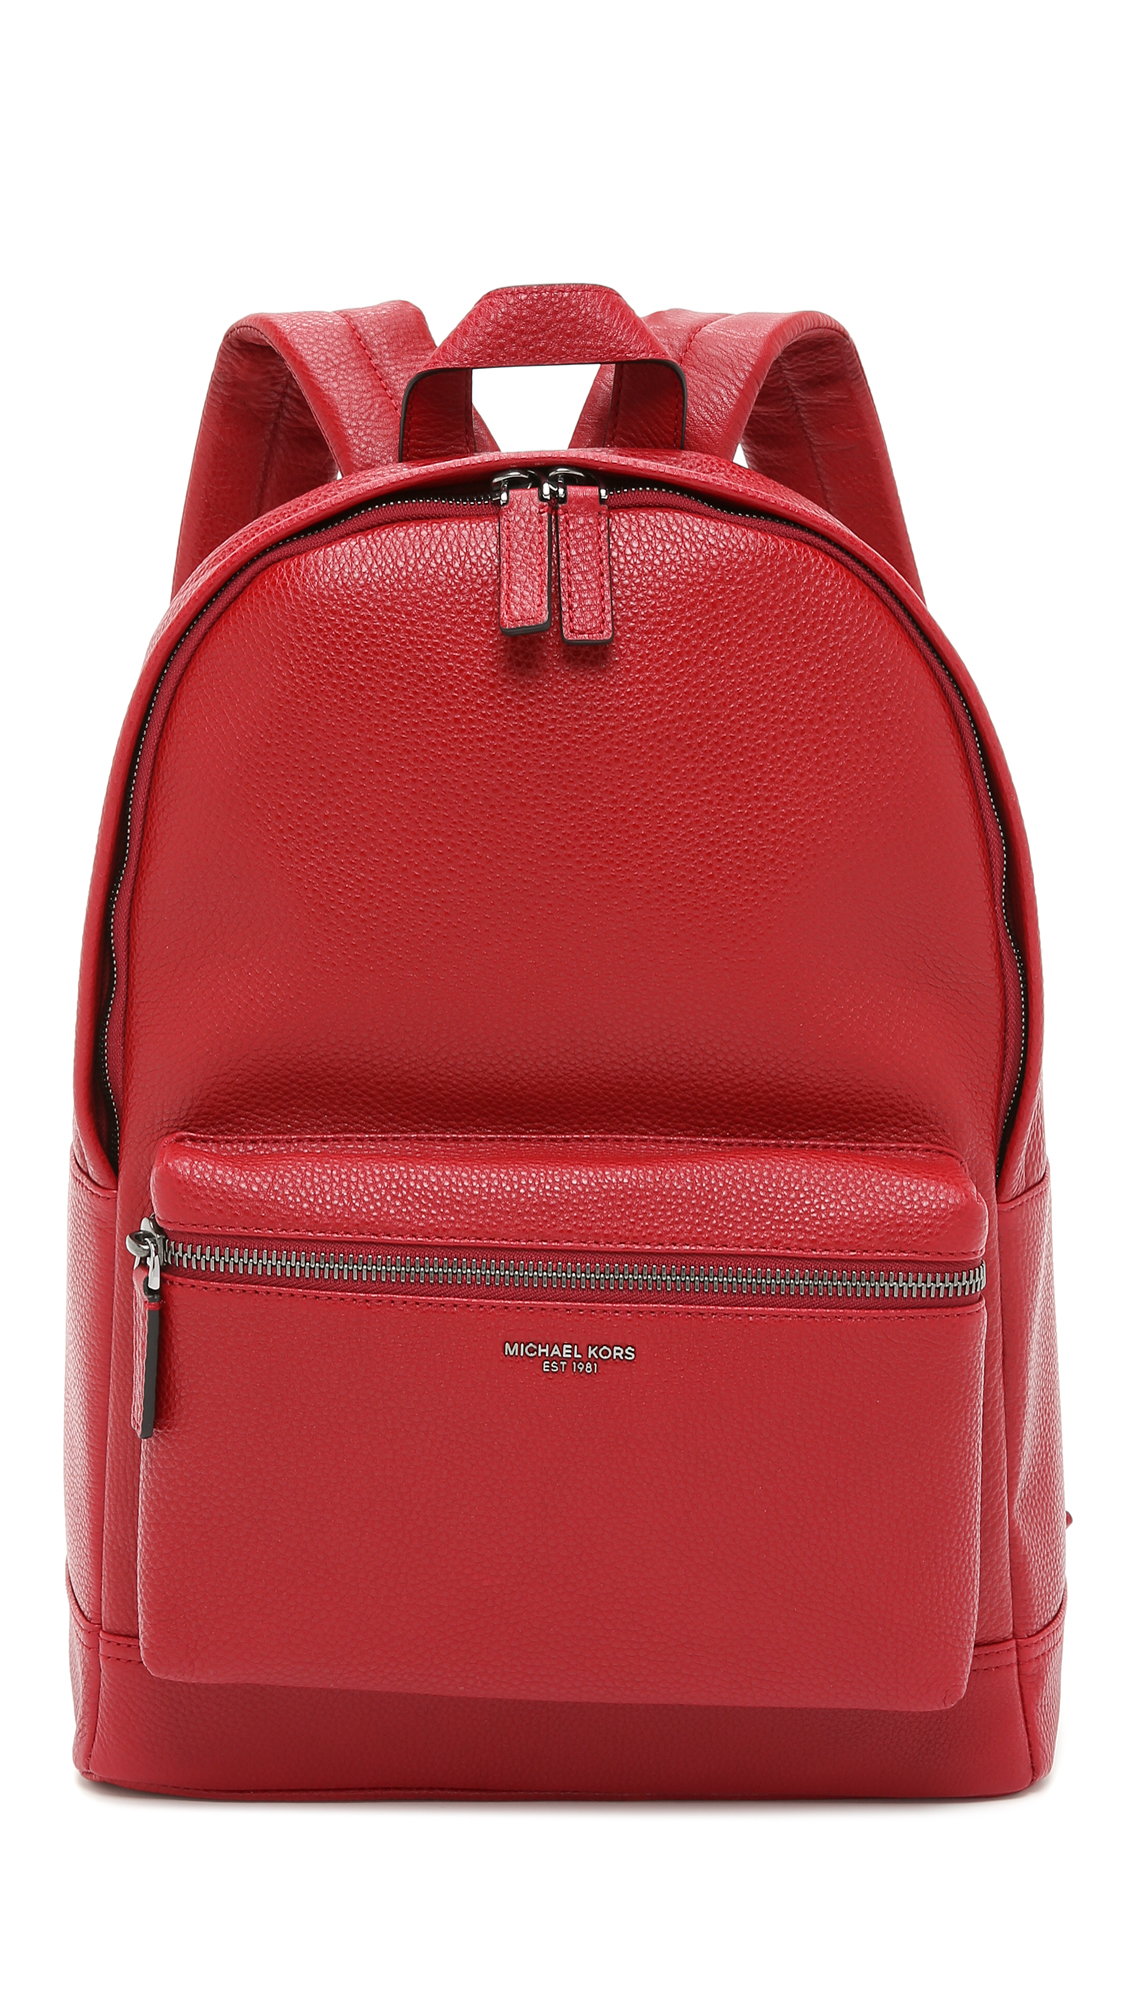 Michael Kors Bryant Pebbled Leather Backpack in Red for Men - Lyst